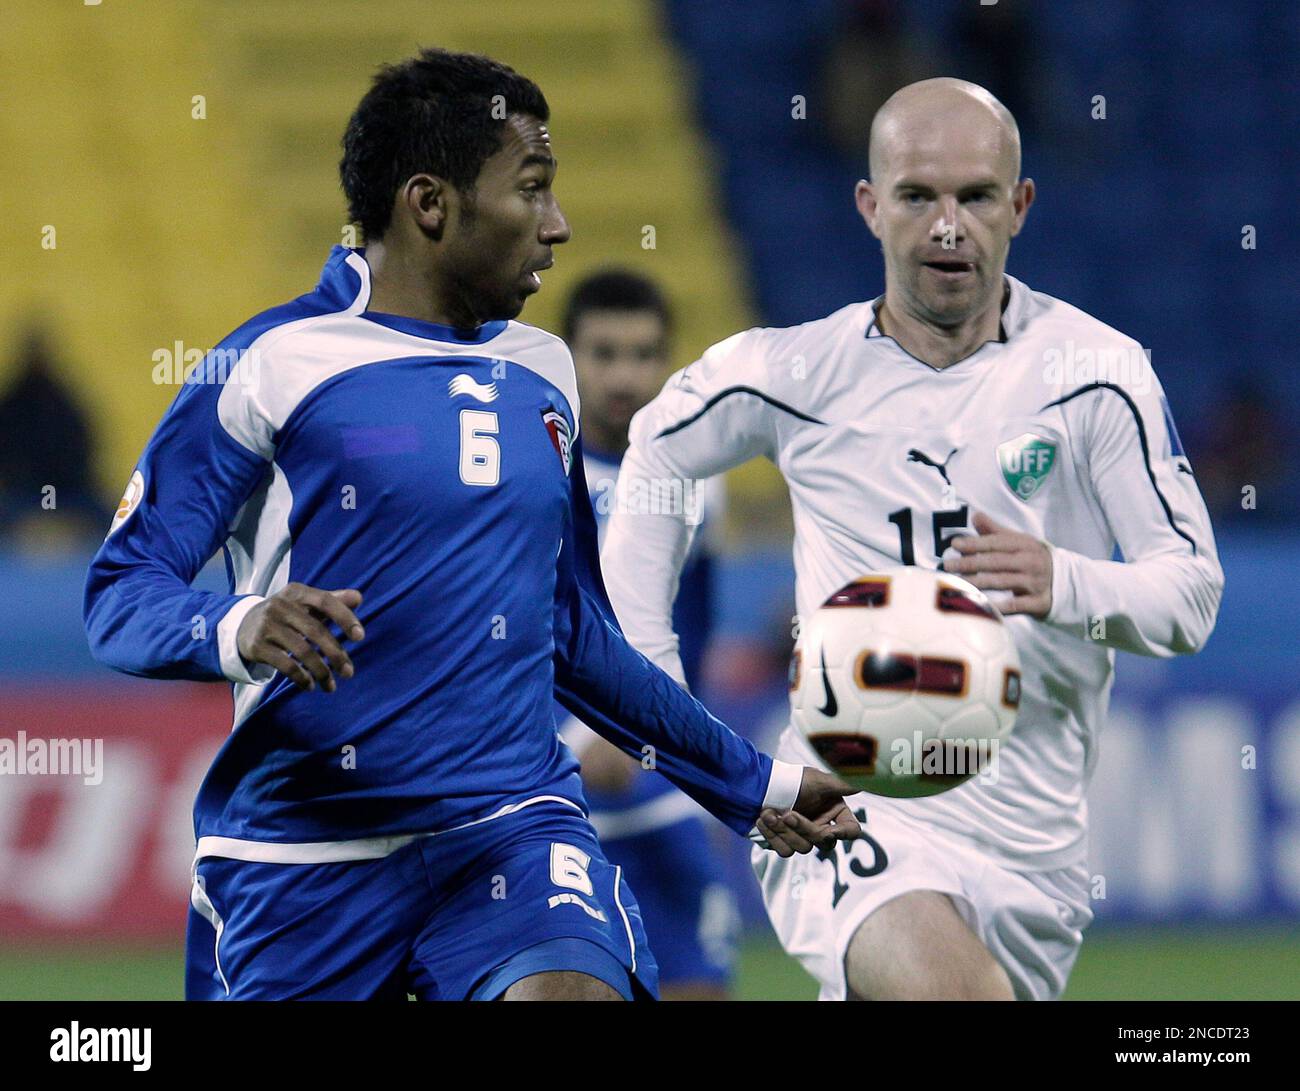 Kuwait's player Amer Matoug, left, fights for the ball against Uzbekistan's player Alexander Geynrikh, right, during their AFC Asian Cup group A soccer match at Al-Gharafa Stadium, in Doha, Gharafa, Wednesday, Jan. 12, 2011. (AP Photo/Hussein Malla) Stock Photo